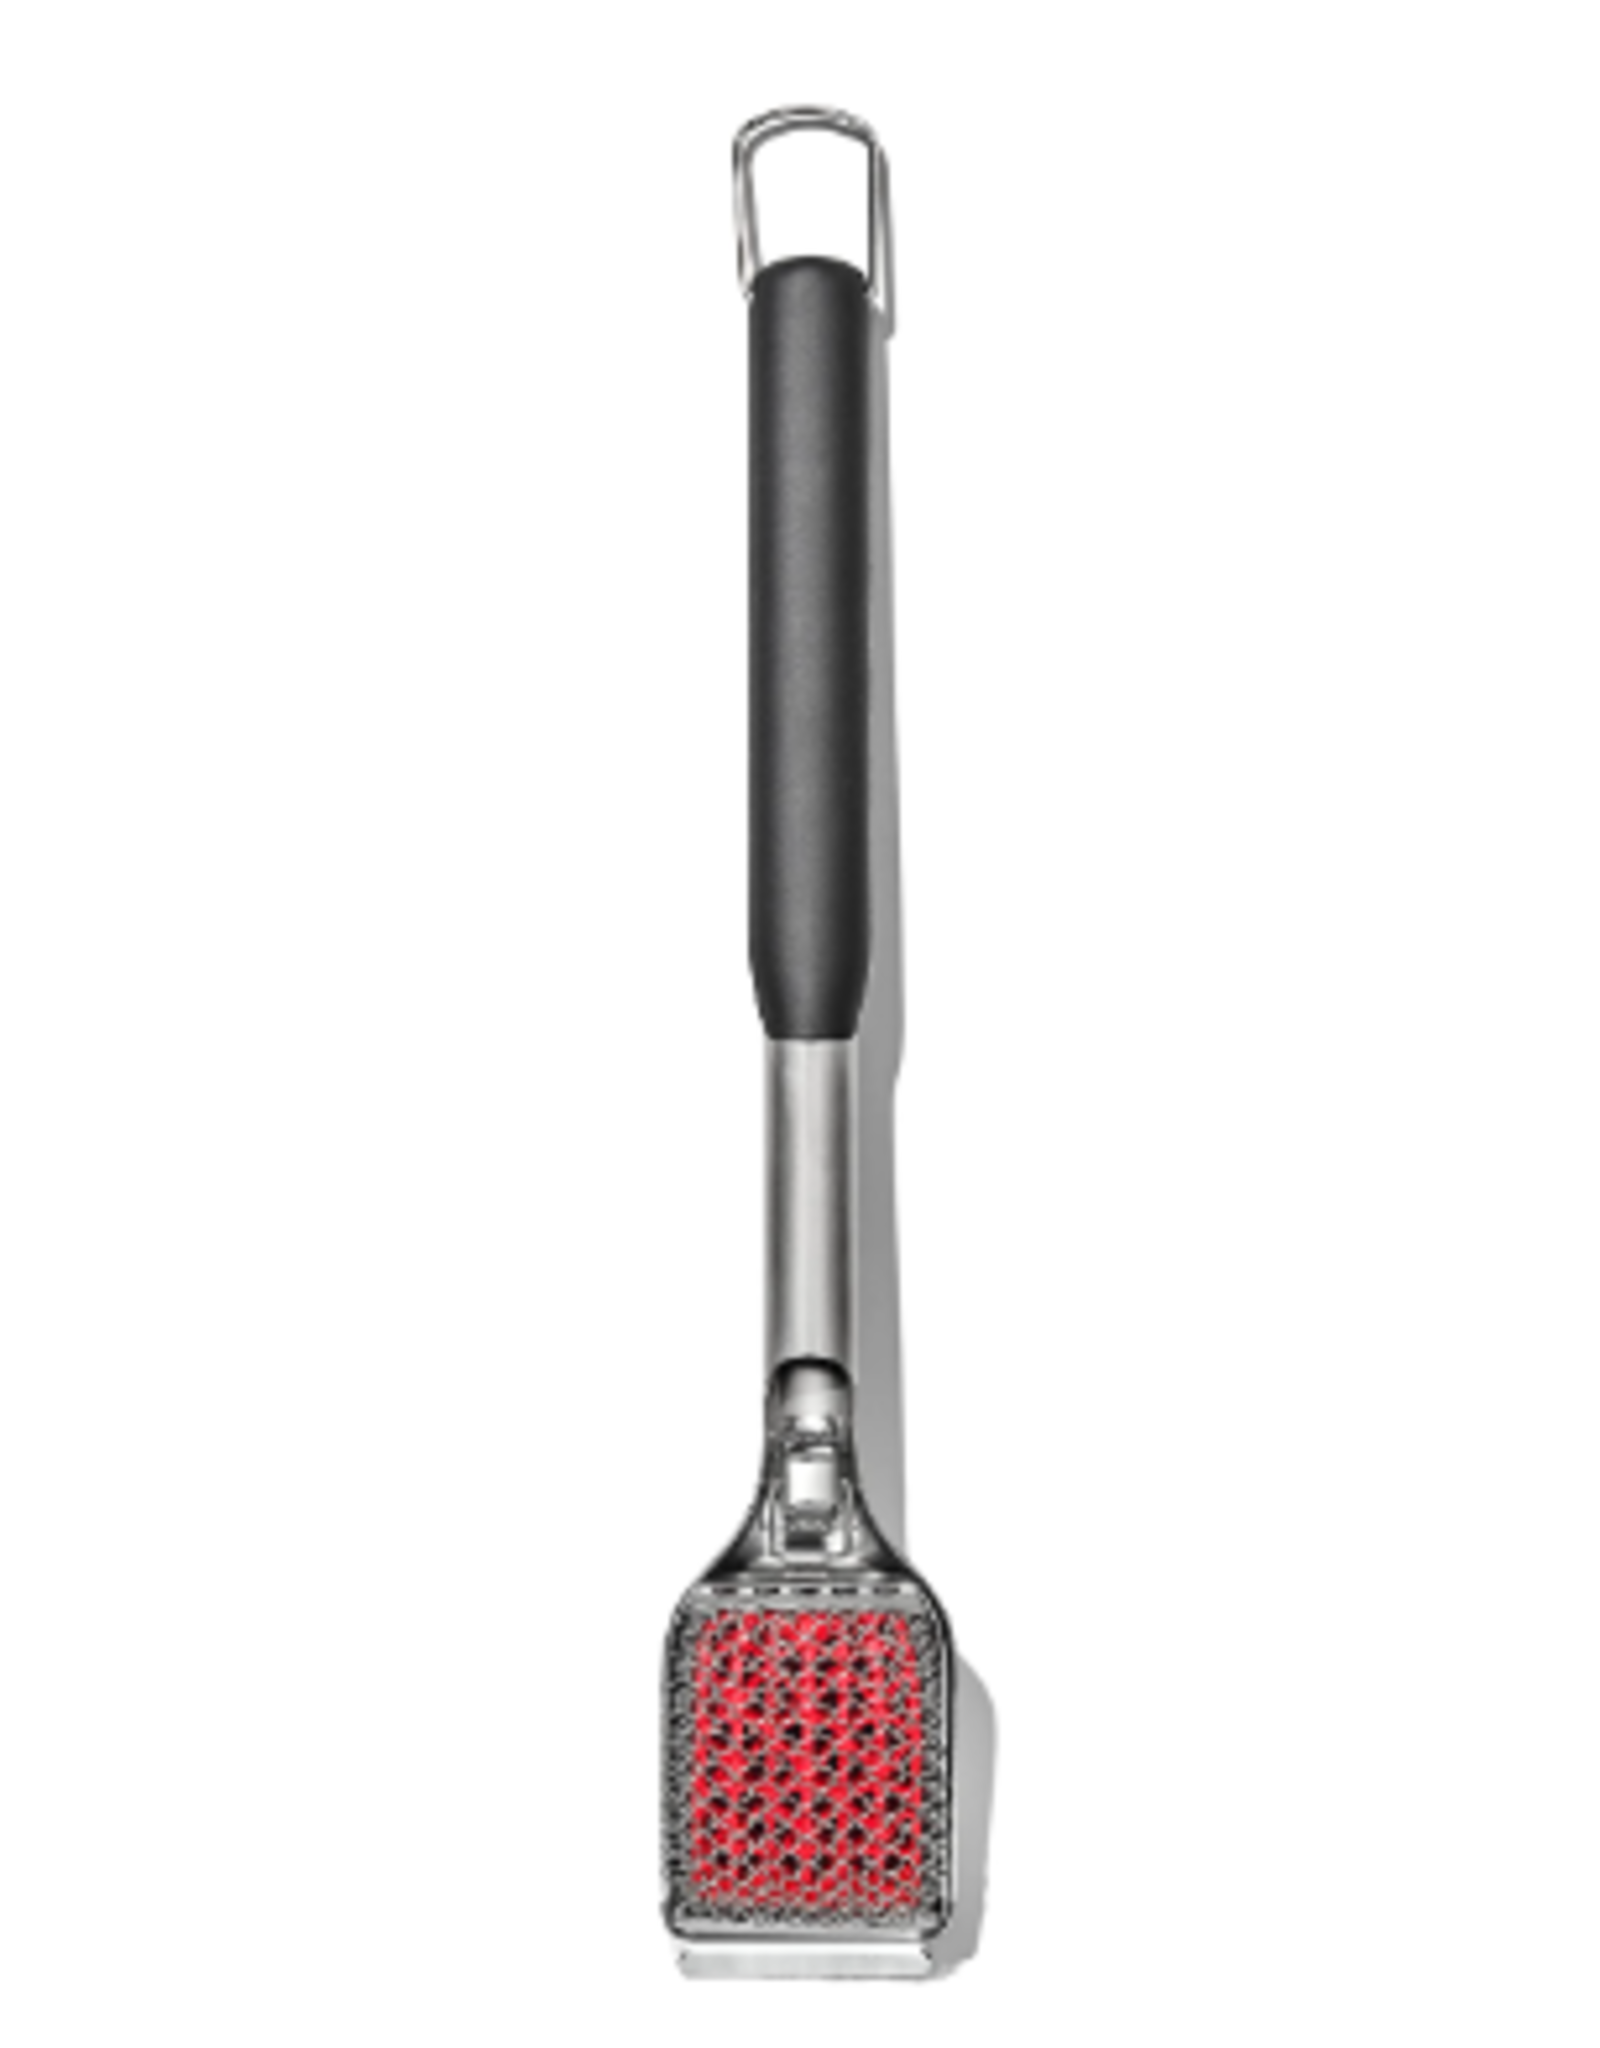 https://cdn.shoplightspeed.com/shops/635781/files/55653011/1600x2048x2/oxo-coiled-grill-brush-with-replaceable-head.jpg